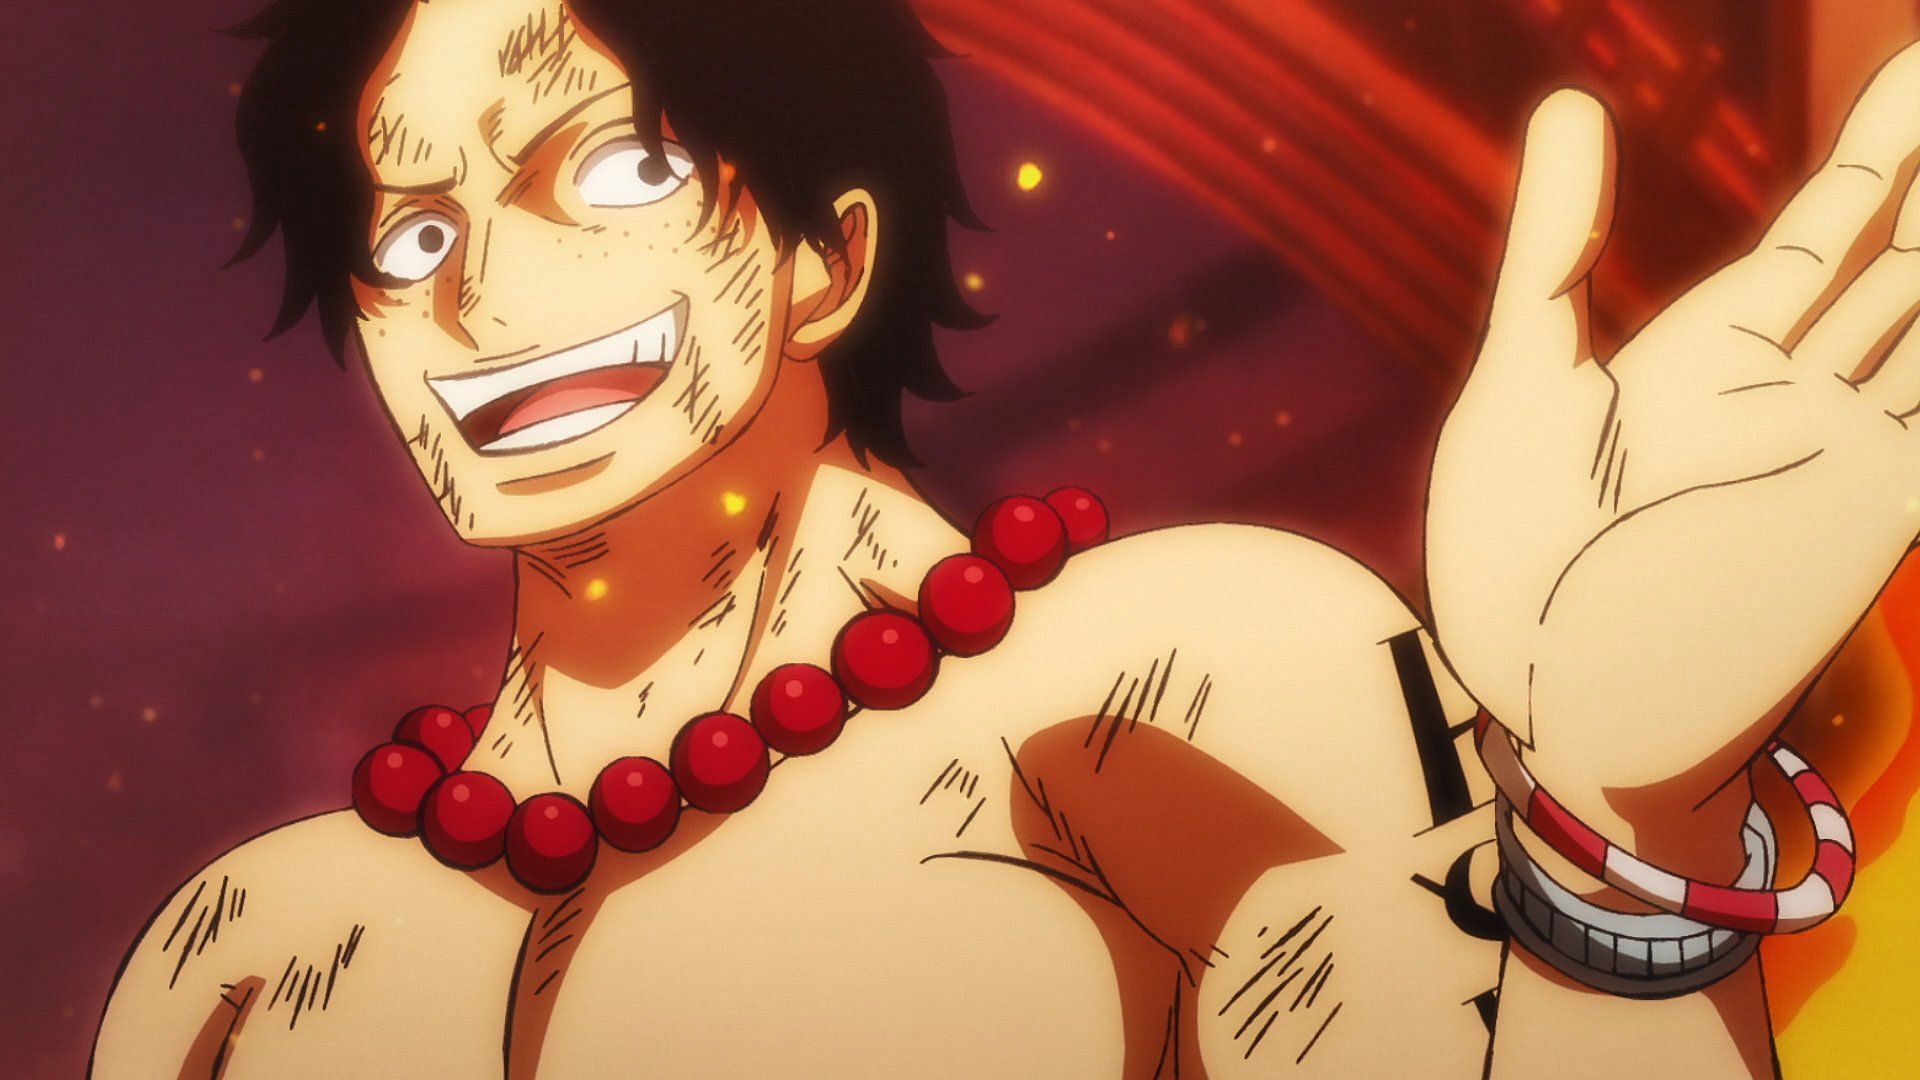 Ace as seen in the One Piece anime series (Image via Toei Animation)